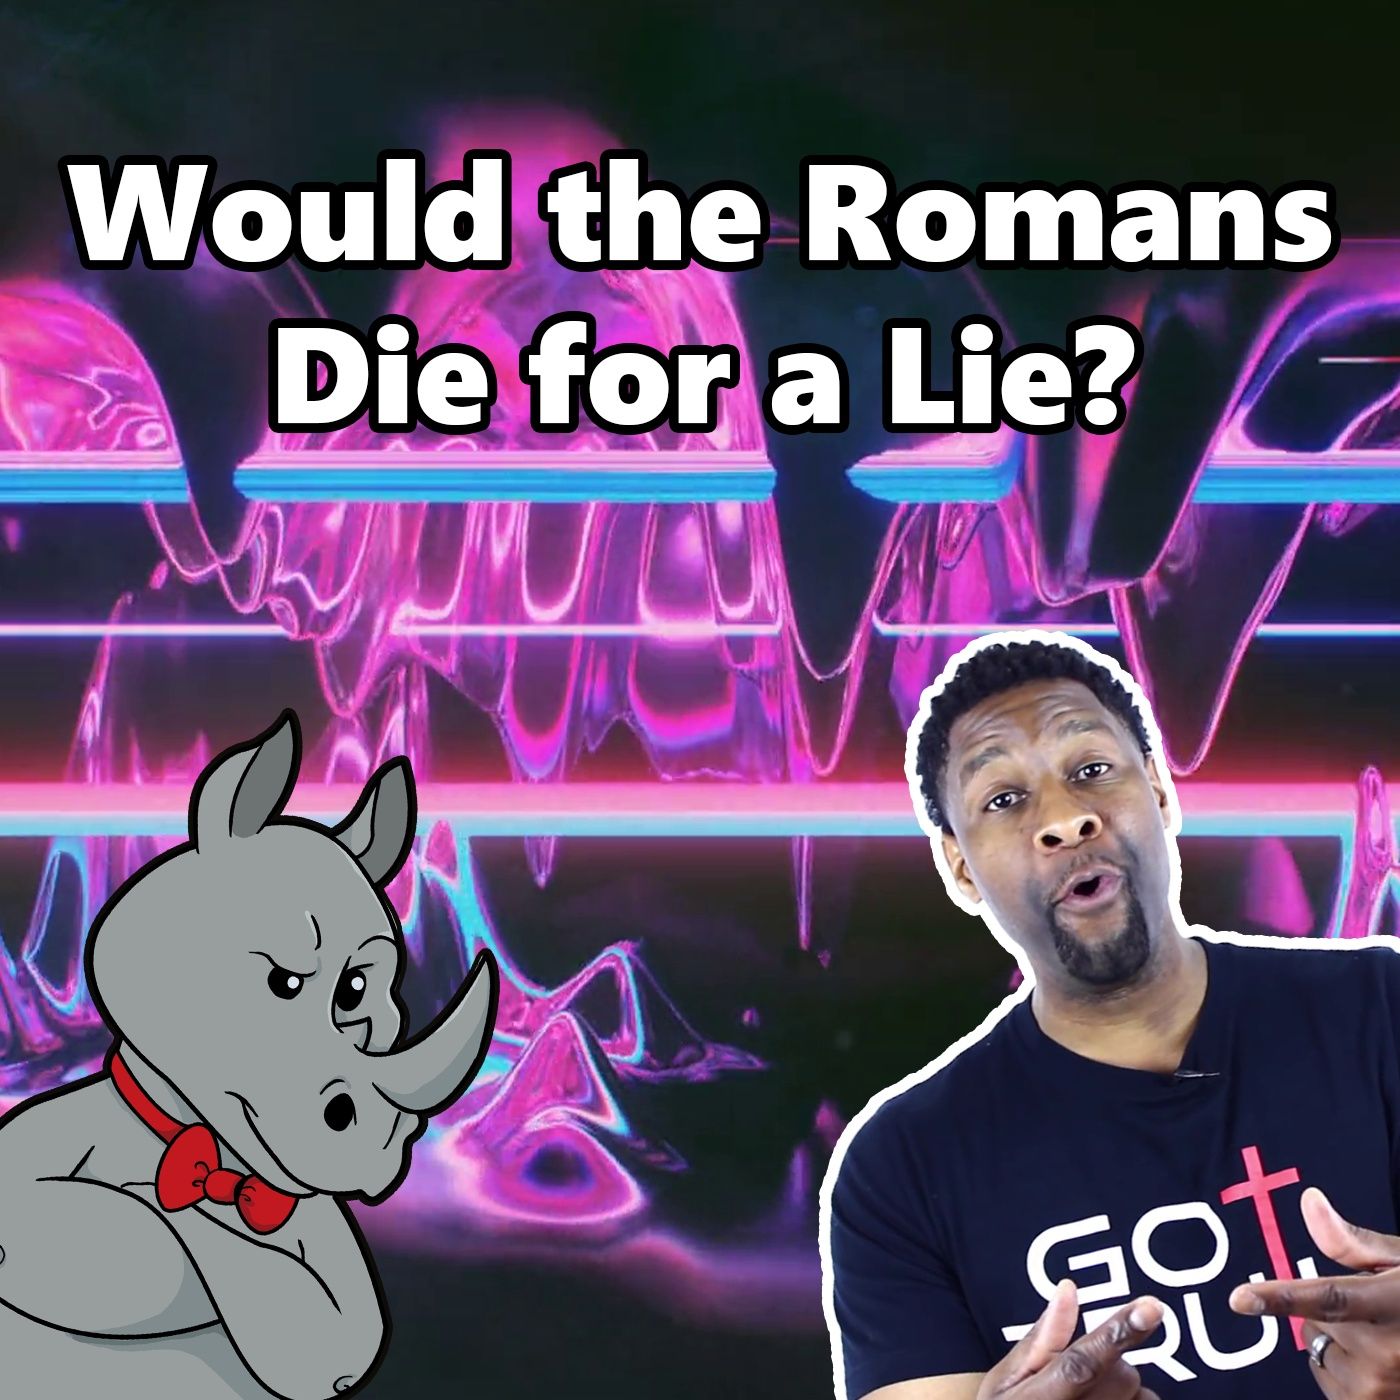 Why Would the Romans Die for a Lie?